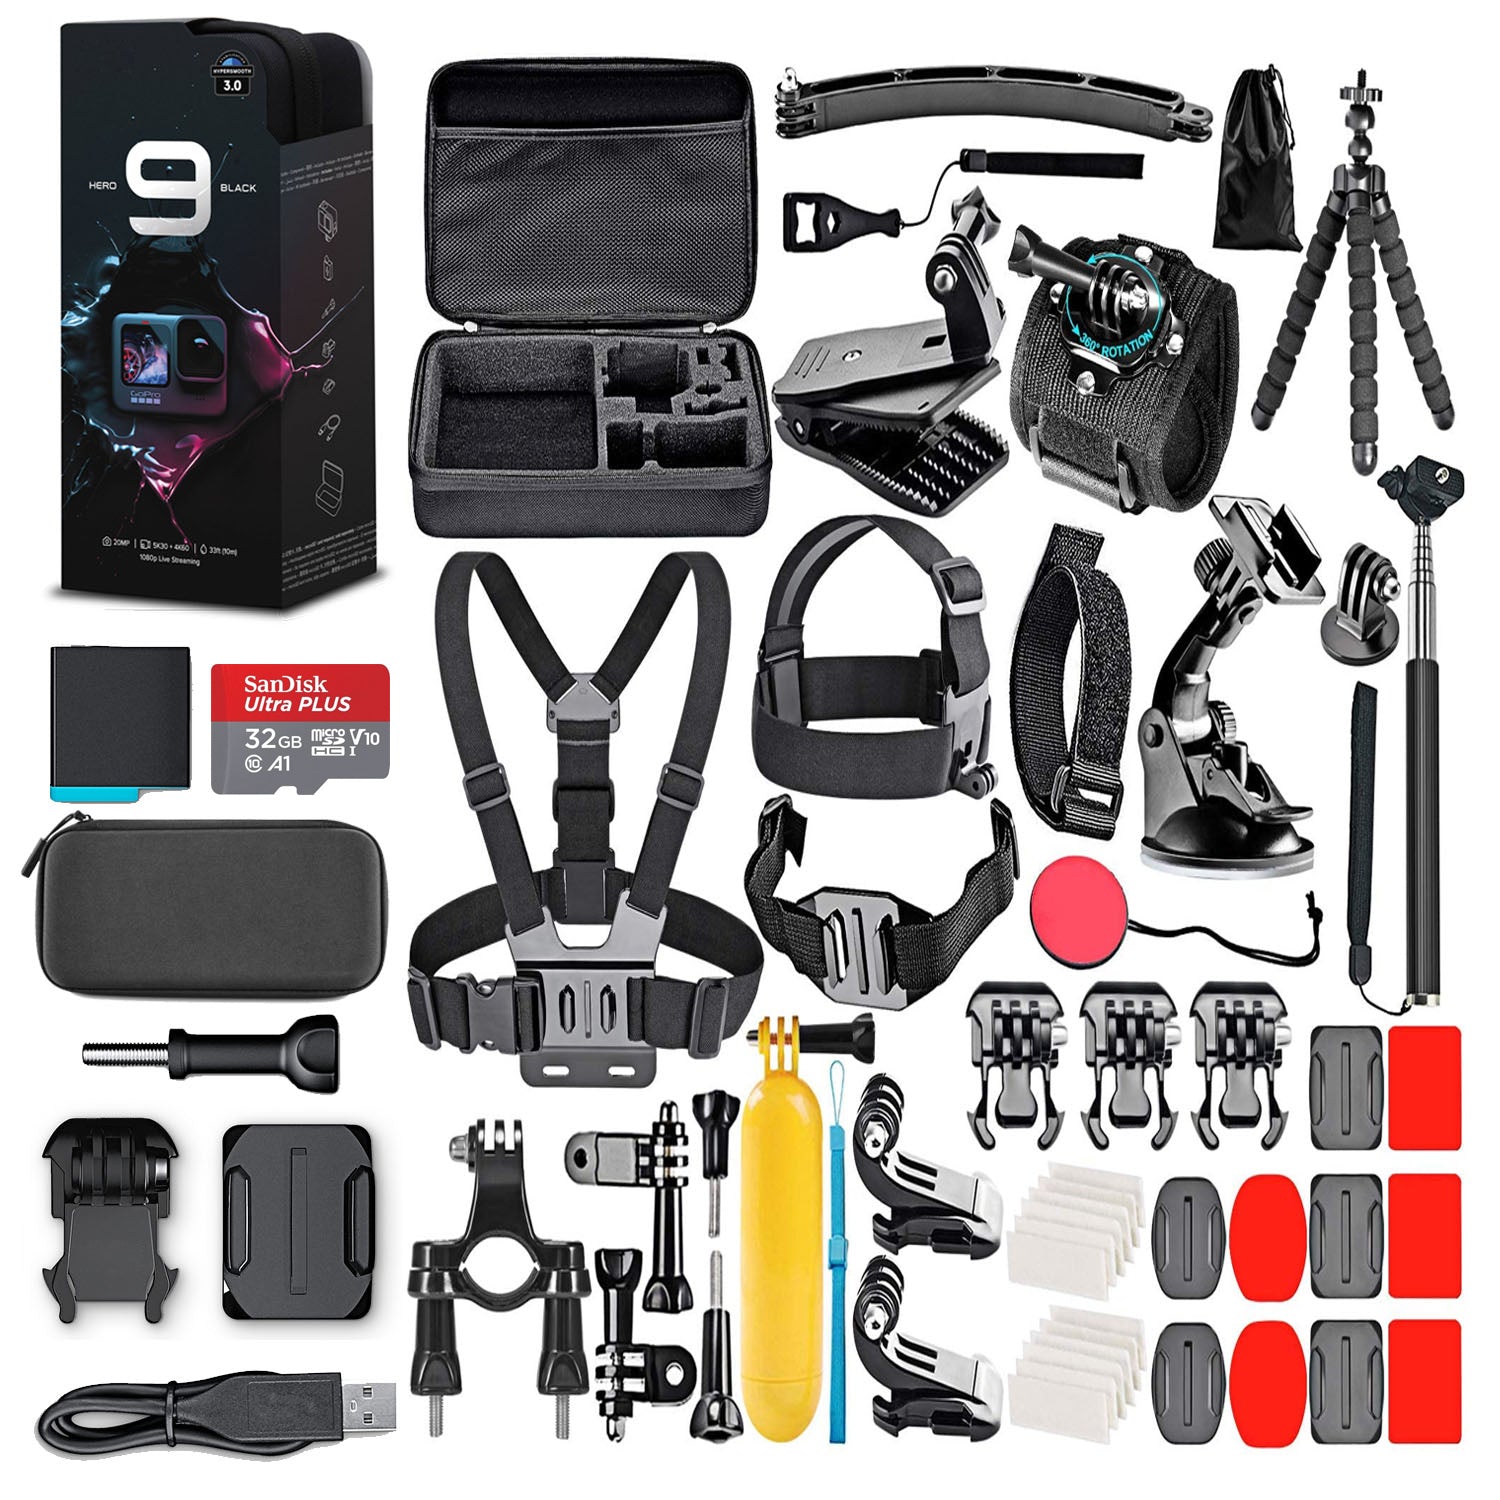 GoPro HERO9 Black with 128GB Card & 50 Piece Accessory Kit